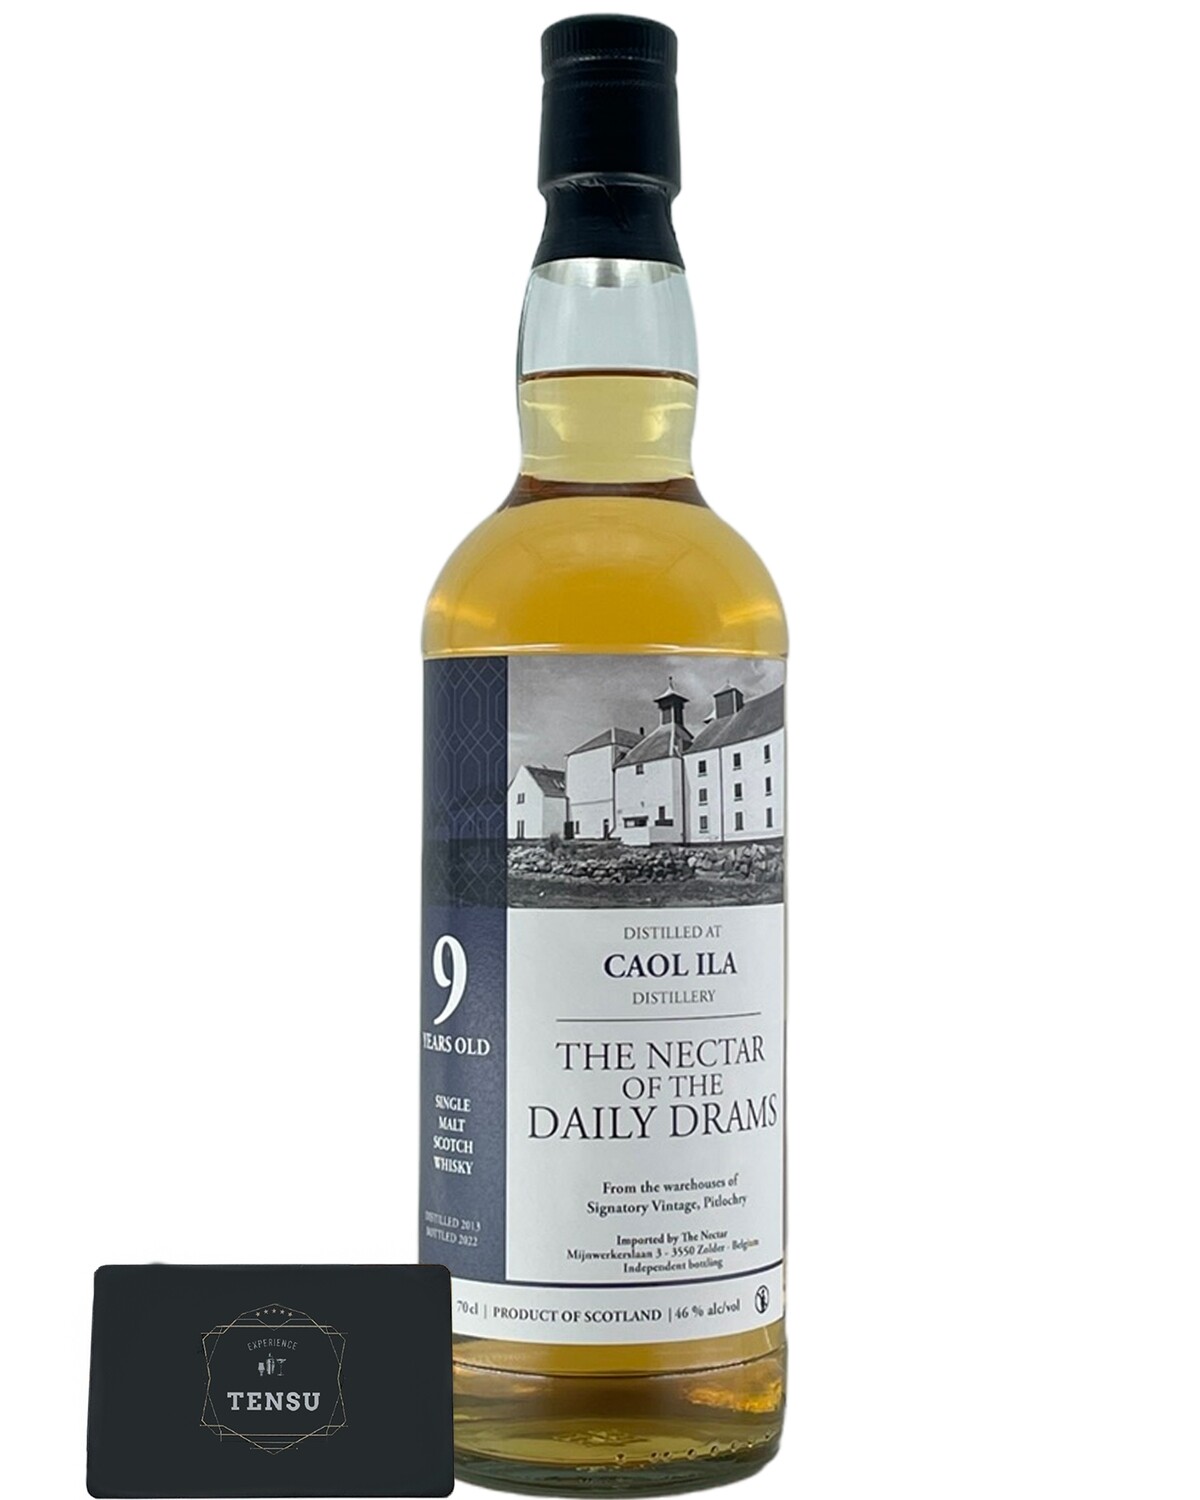 Caol Ila 9 Years Old (2013-2022) 46.0 Daily Drams "The Nectar"